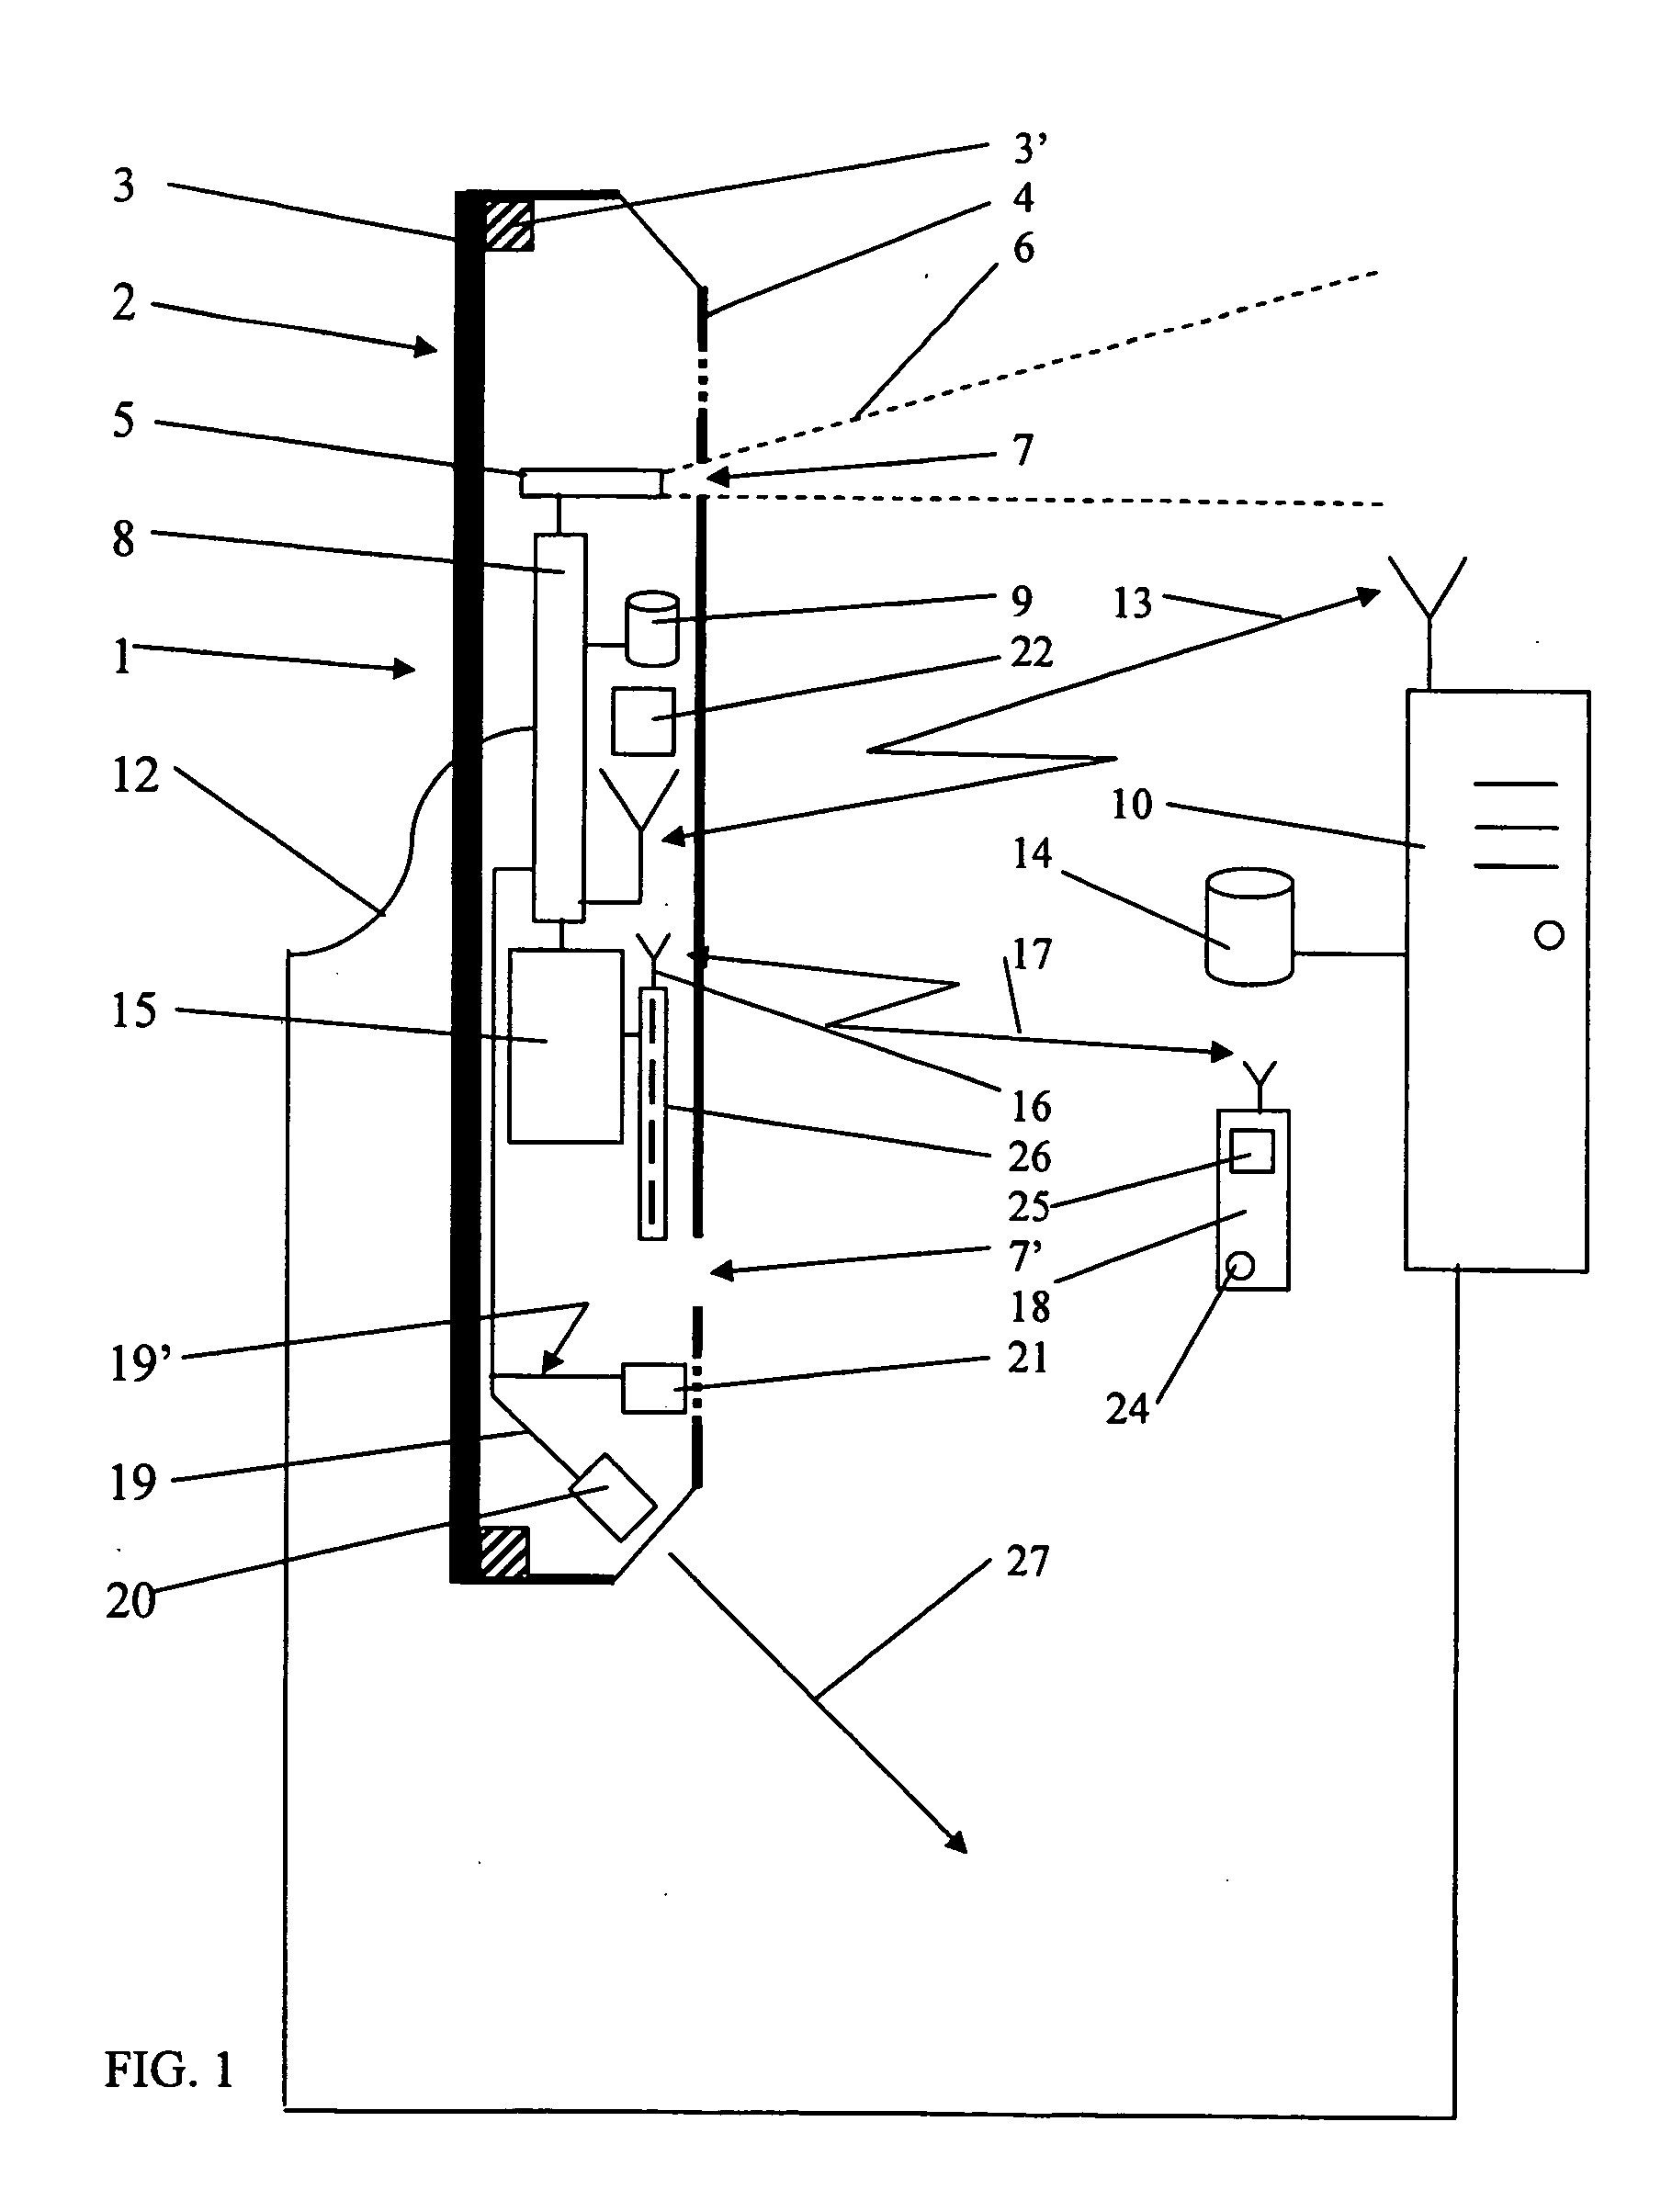 Apparatus with an infrared sensor and magnetic near field communication properties for monitoring activity in a selected area